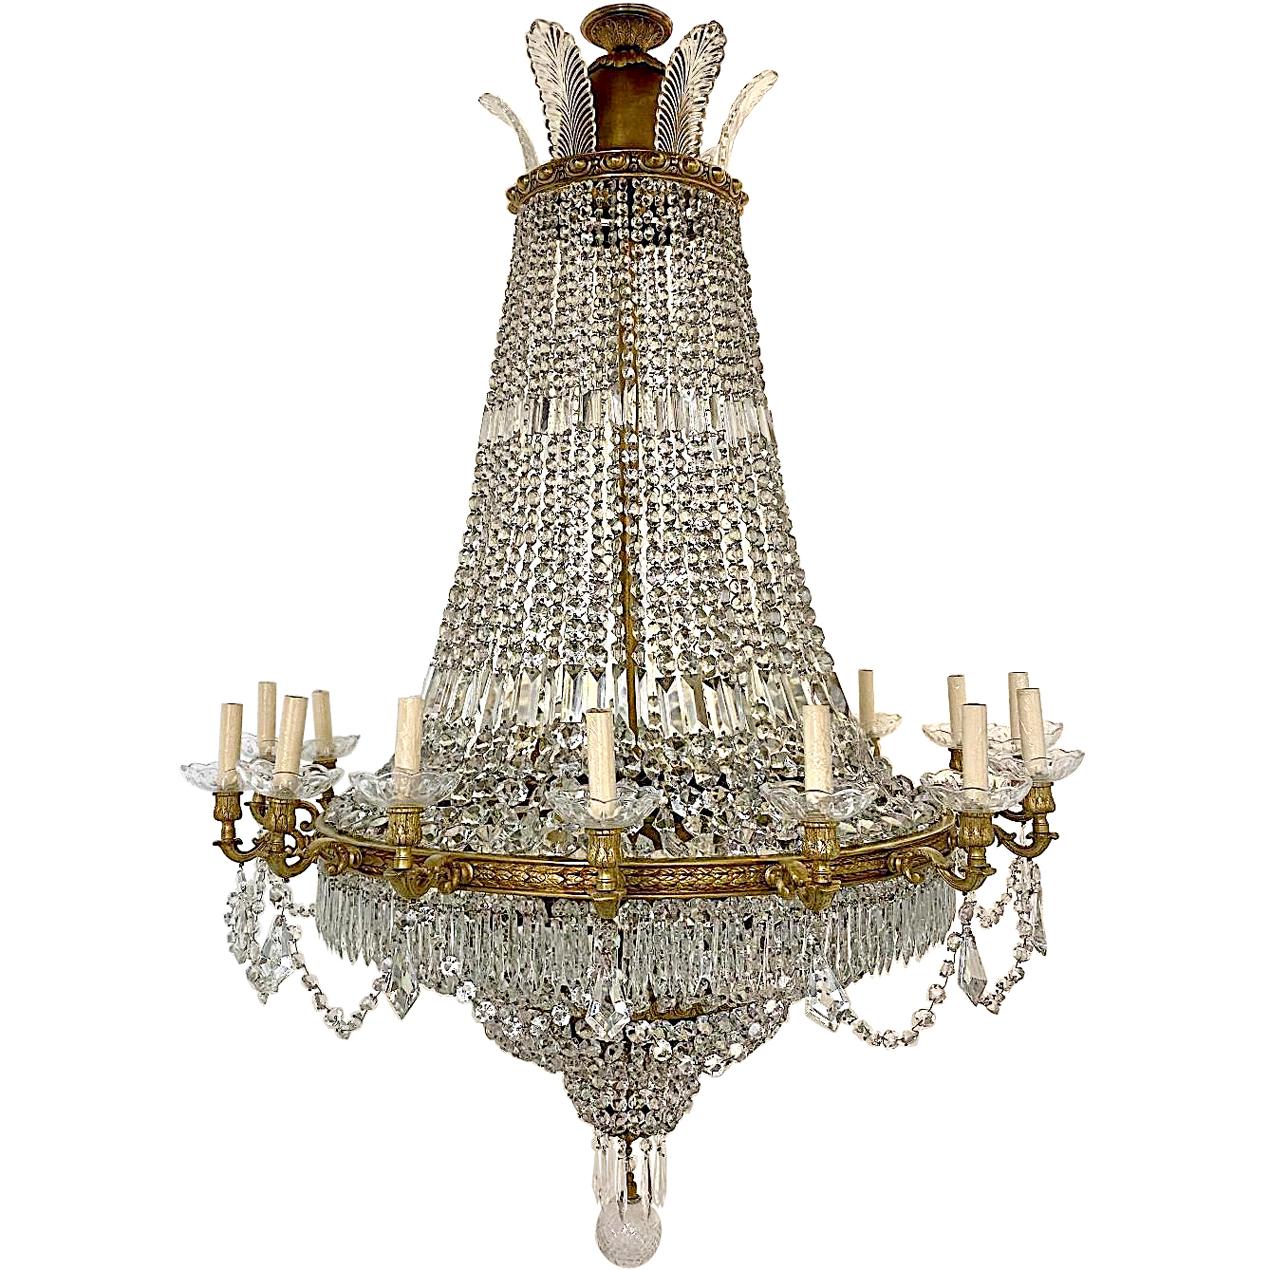 A set of four large French circa 1940s sixteen-arm chandelier with fourteen interior lights, original gilt body dressed with crystal chains and swags. Sold individually.

Measurements
Minimum drop 65